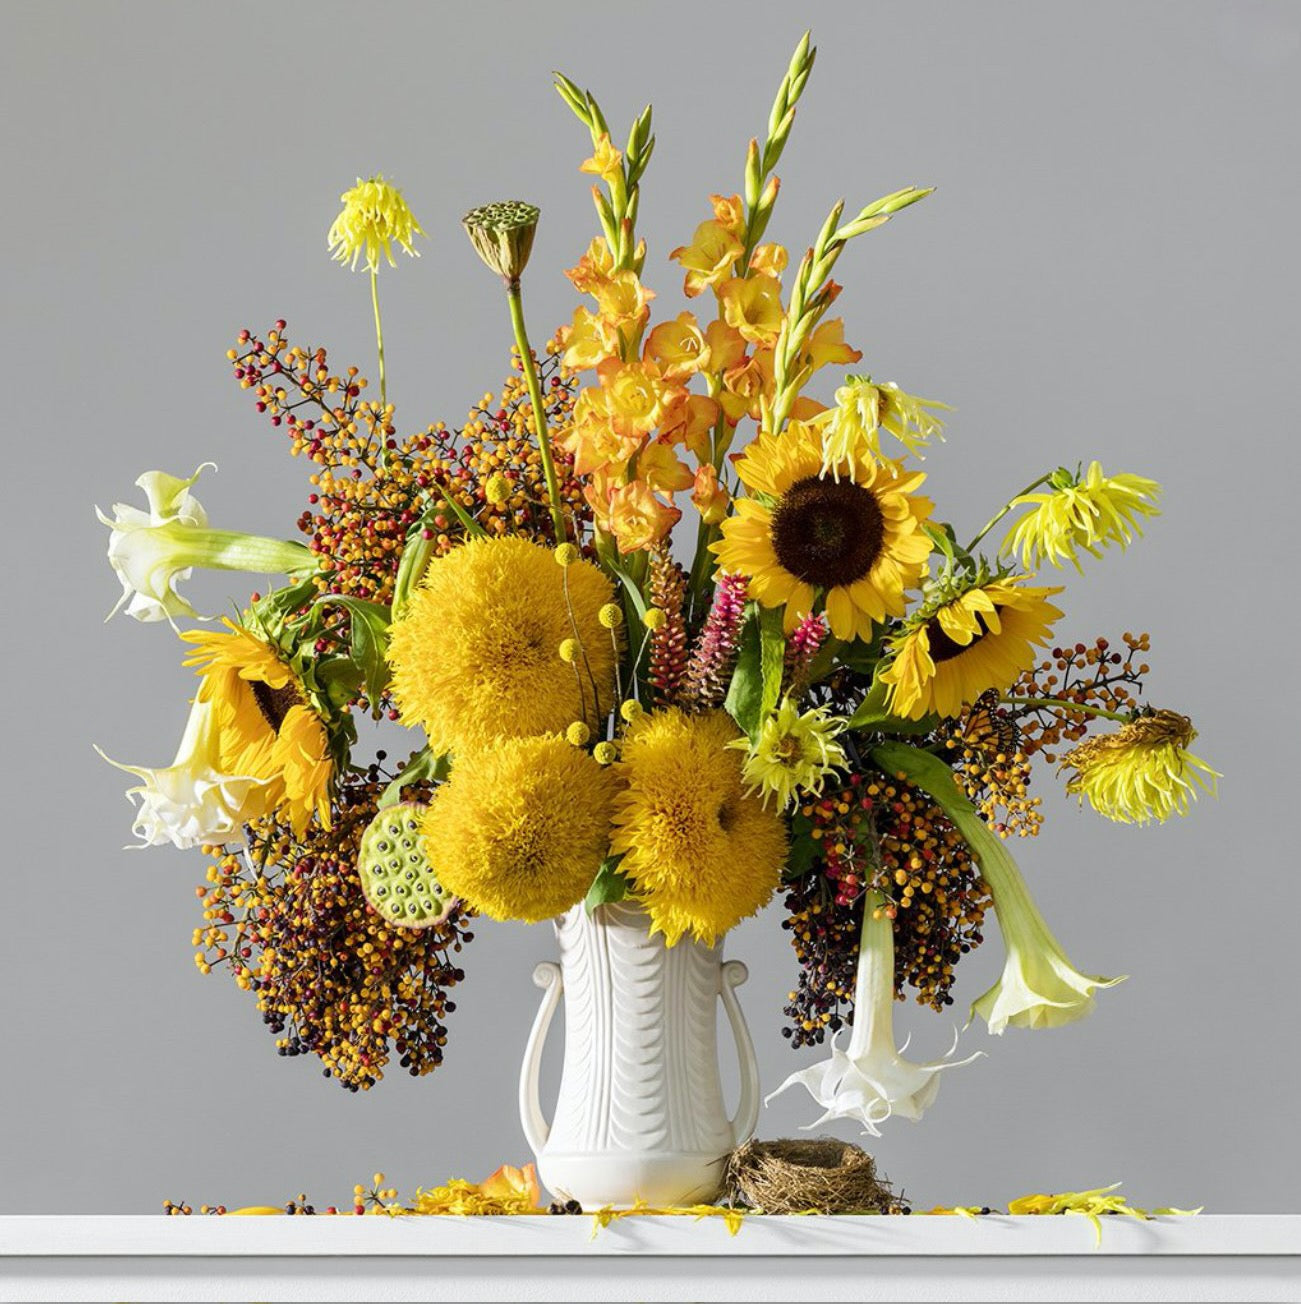 Photograph of a slightly-wilted yellow flower arrangement